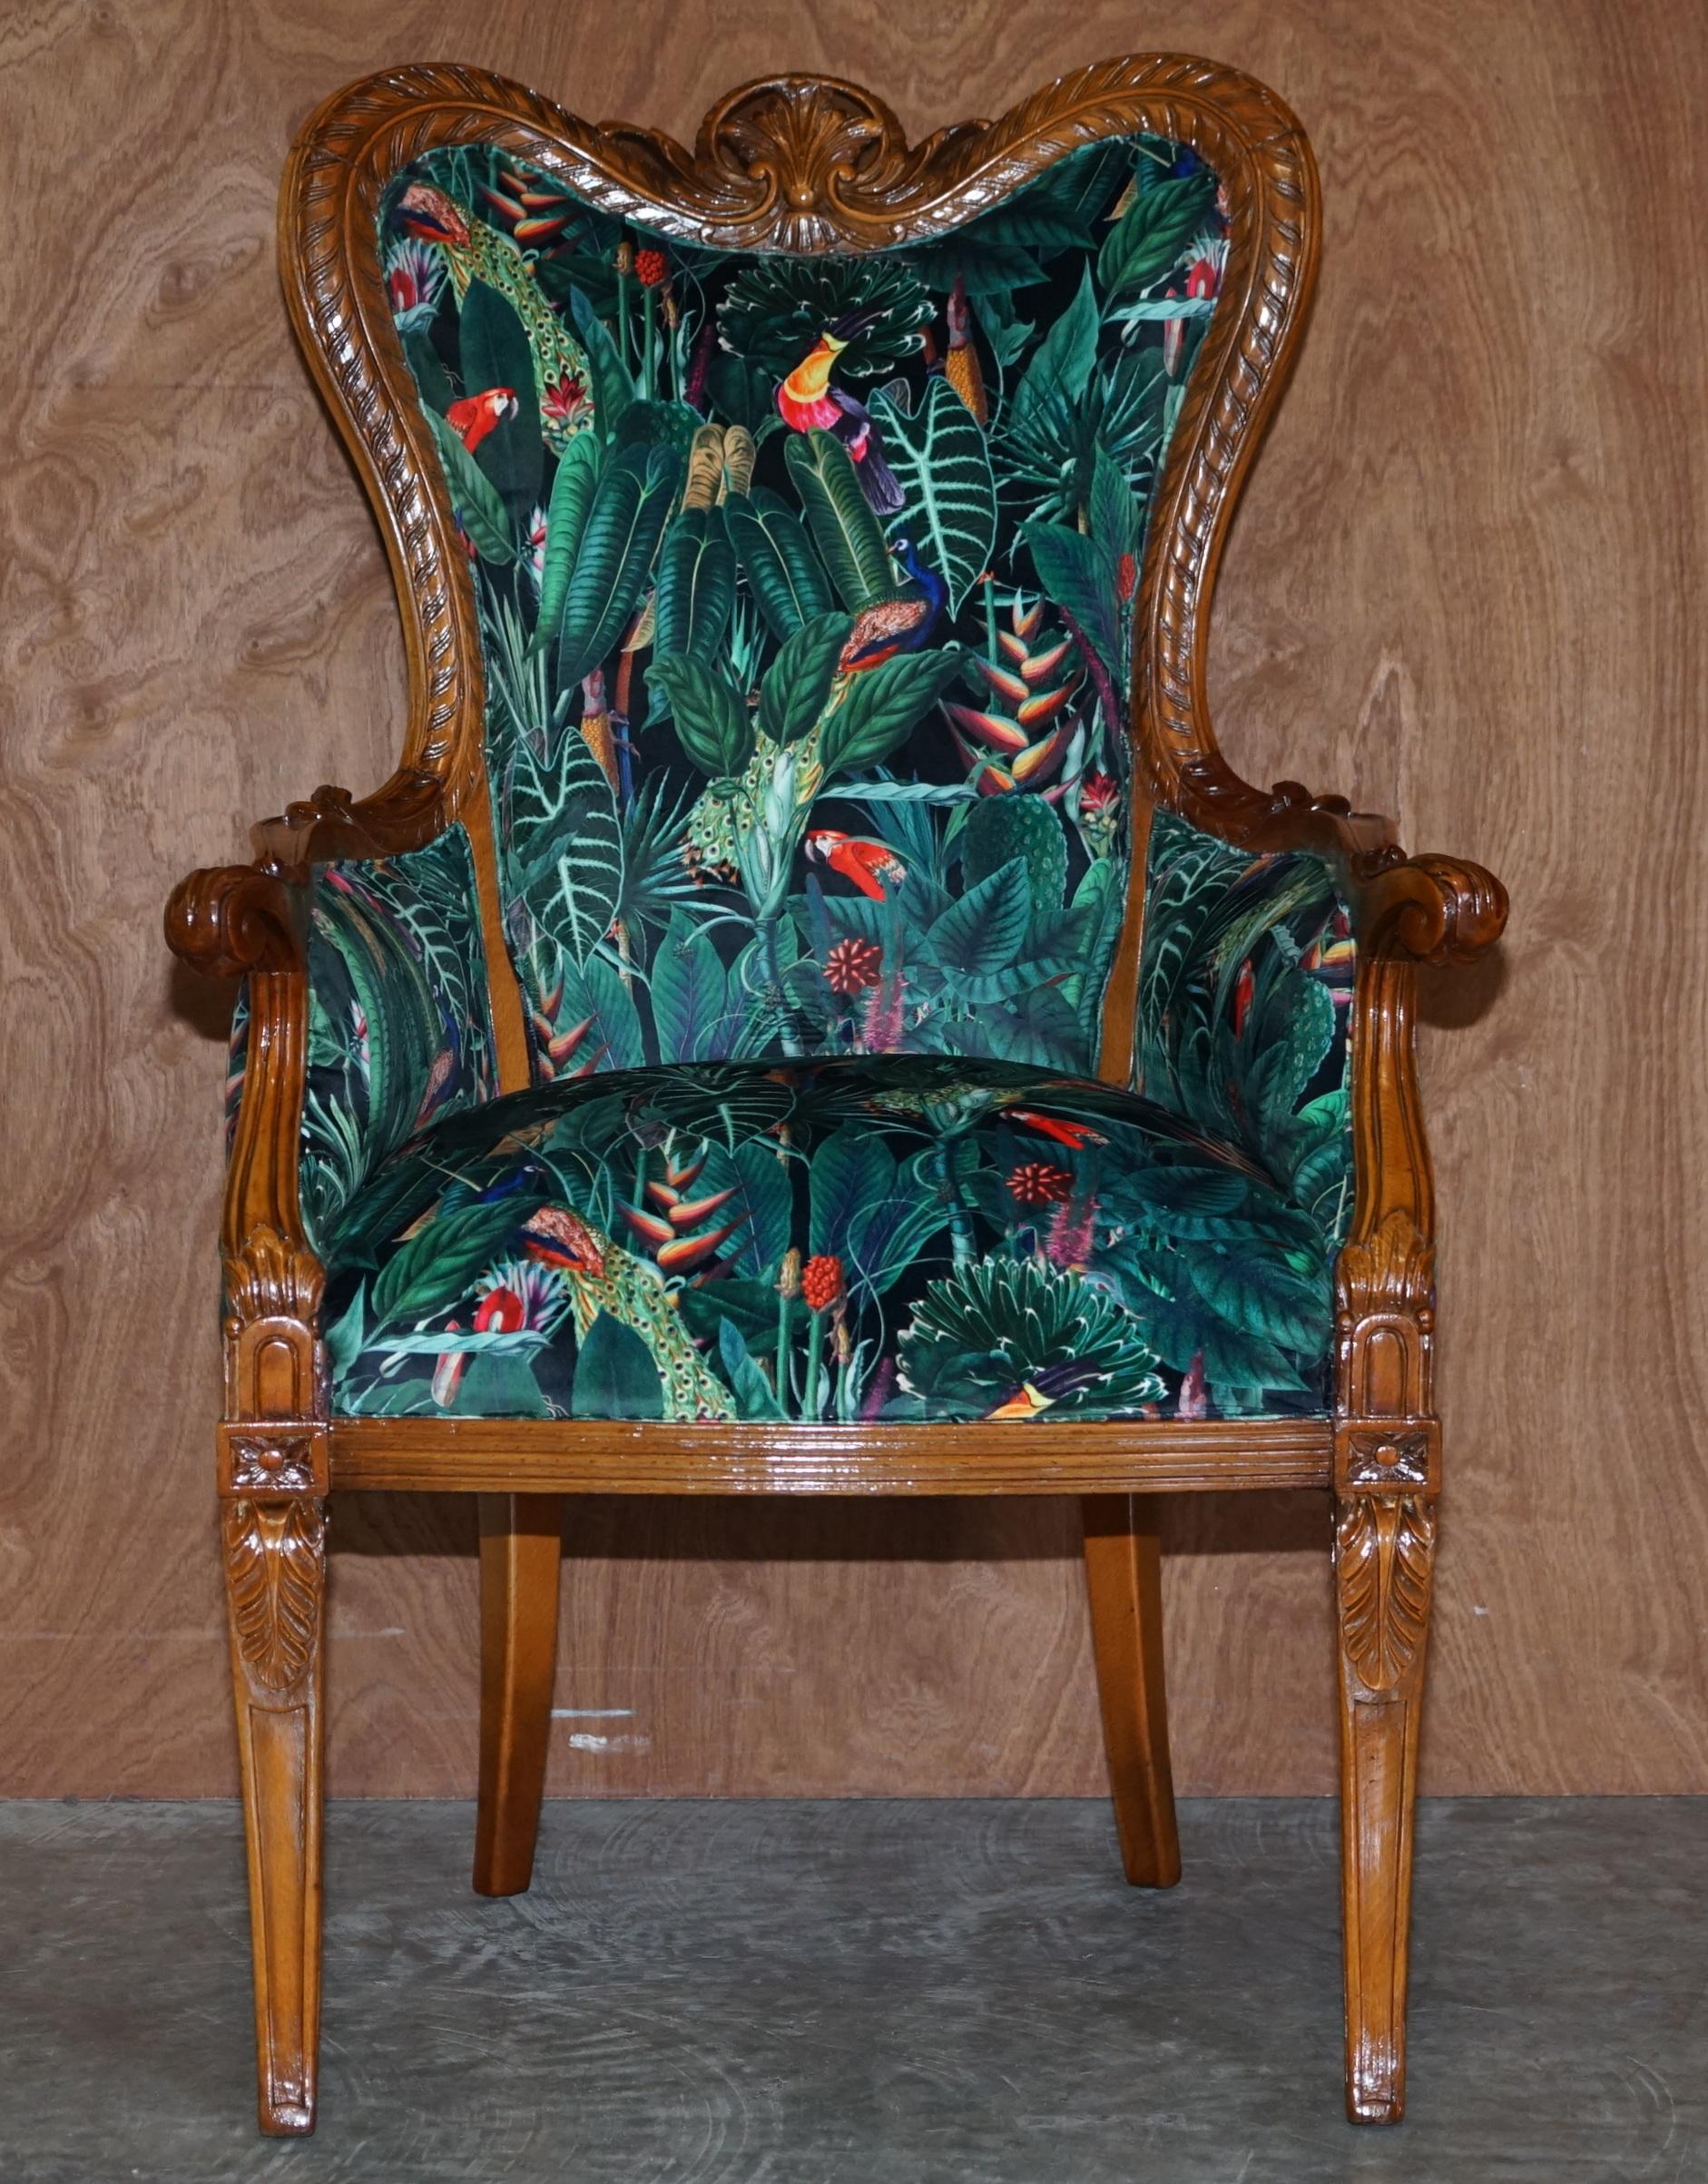 We are delighted to offer this lovely vintage, carved Walnut frame, Italian armchair which has been reupholstered in Birds of Paradise velvety fabric

The piece is part of a suite, in total I have a walnut framed carved Italia armchair, an English